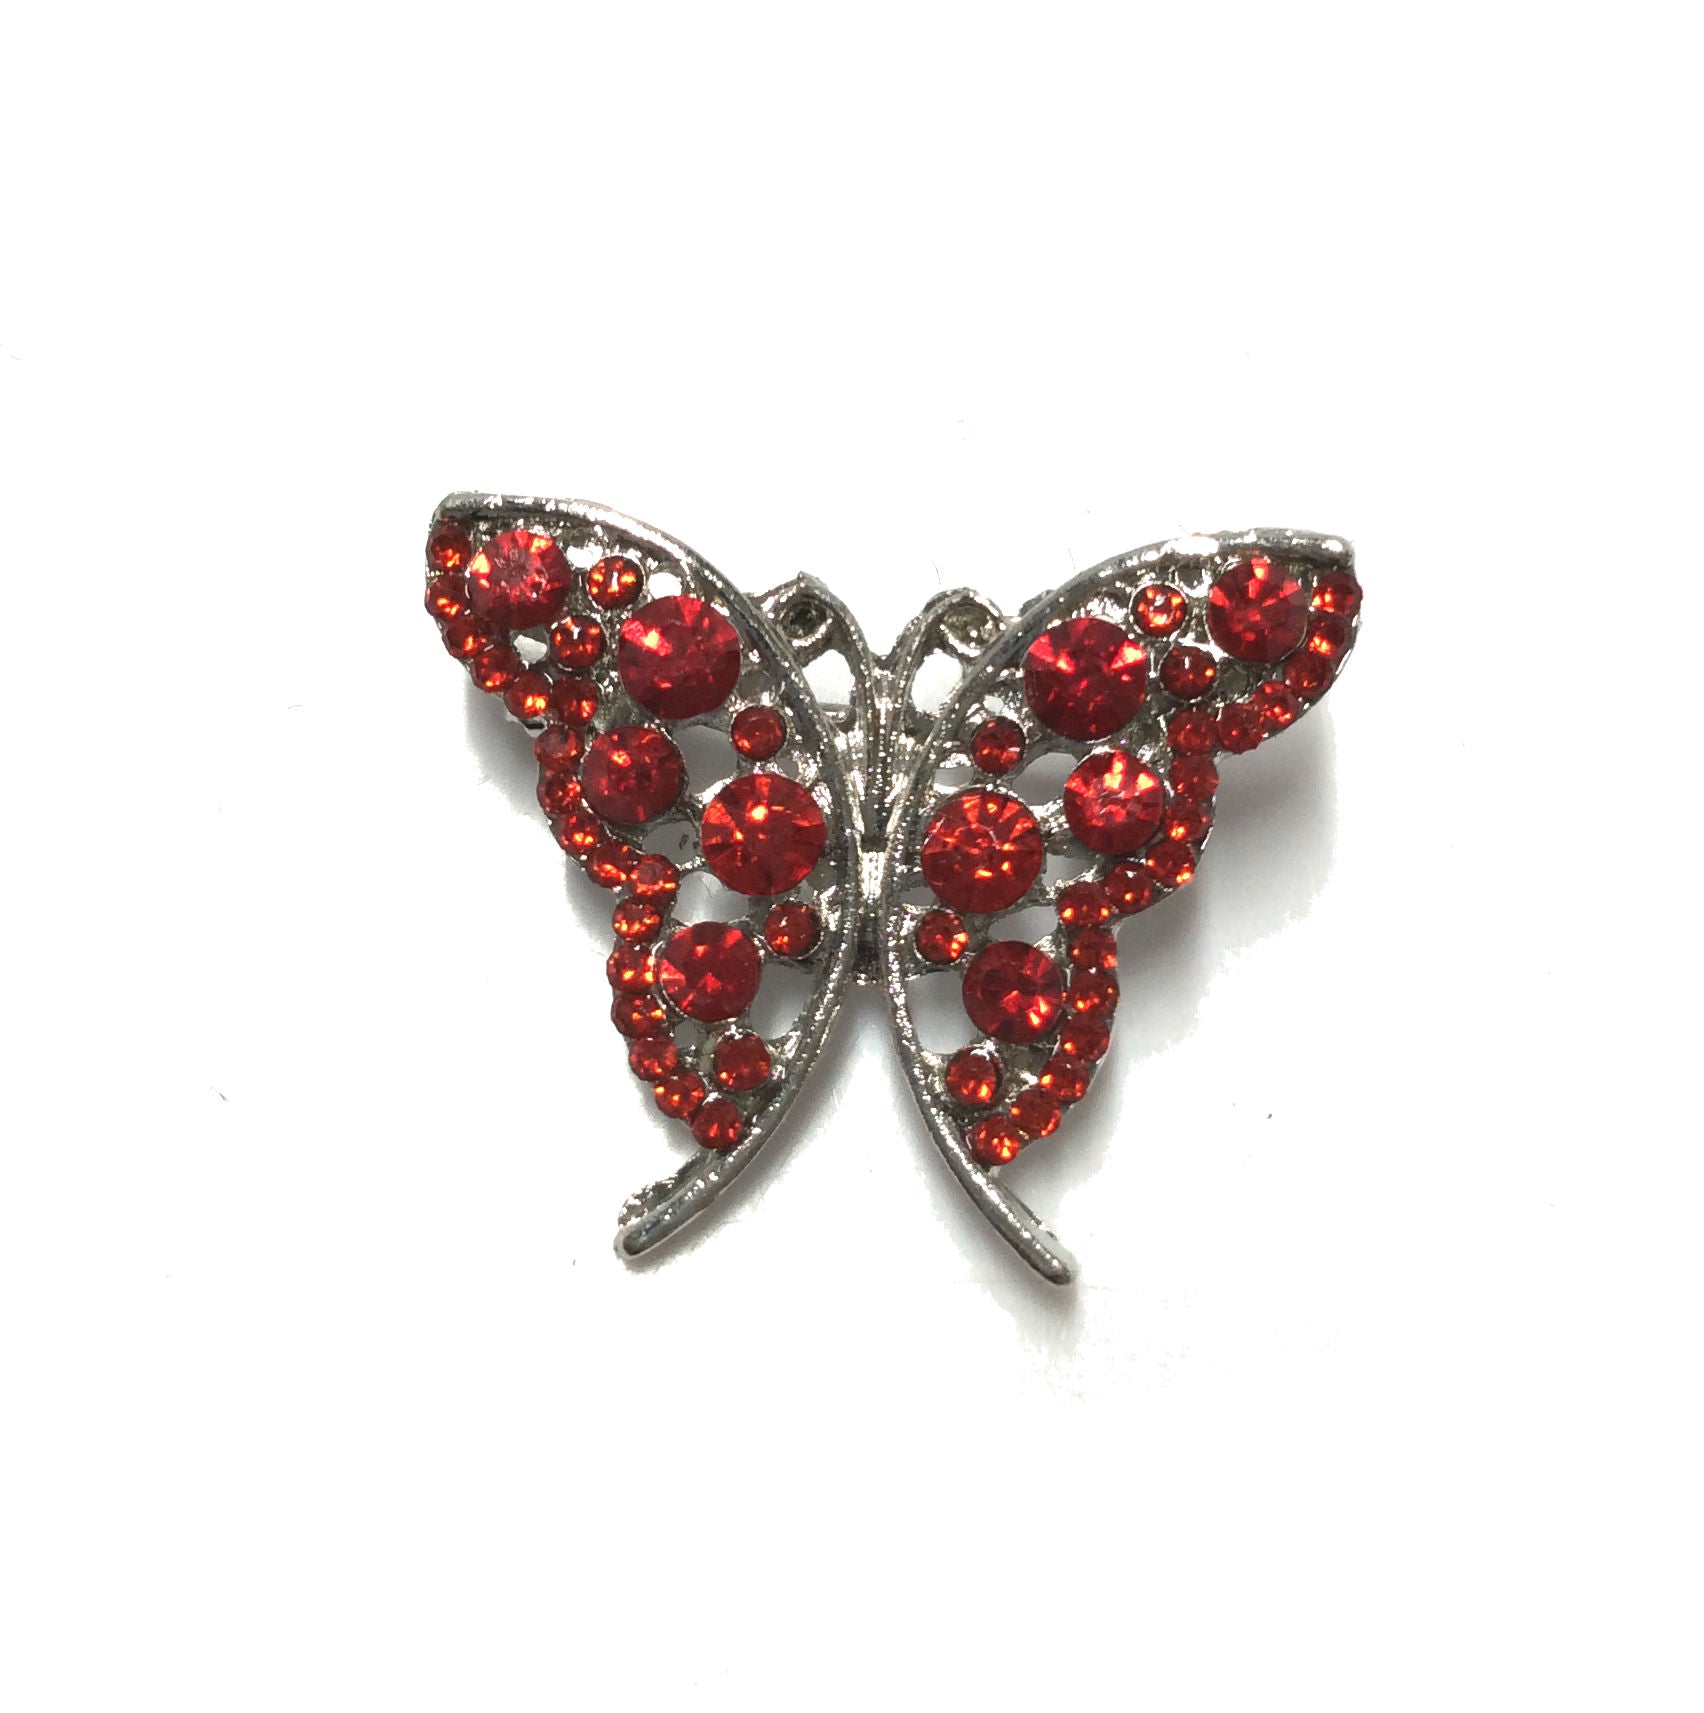 Small Butterfly Pin #28-111691RD (Red)